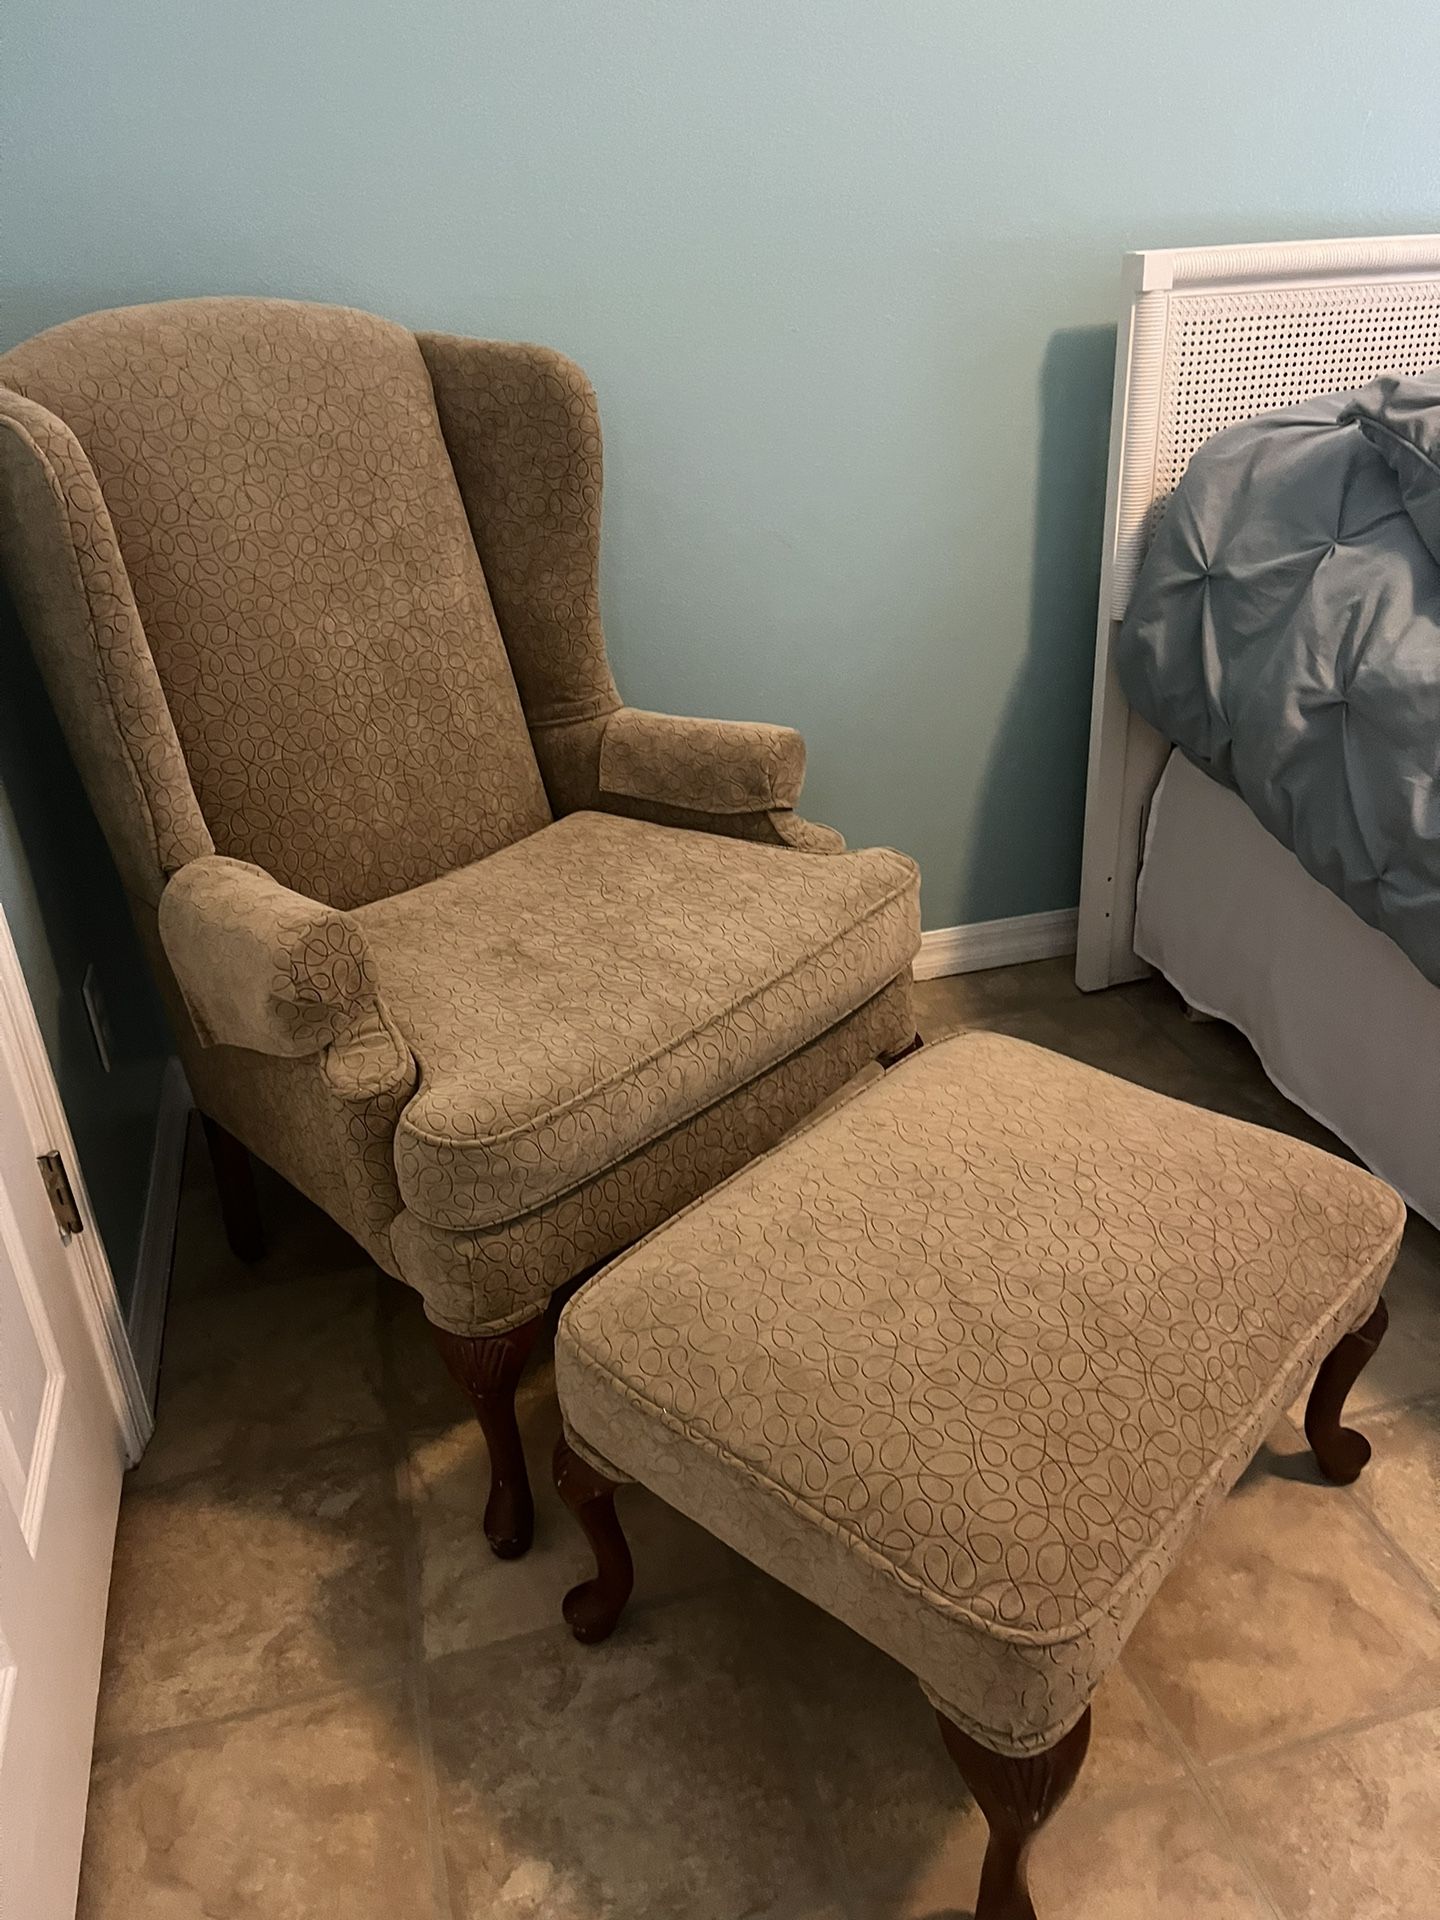 Reading chair with ottoman